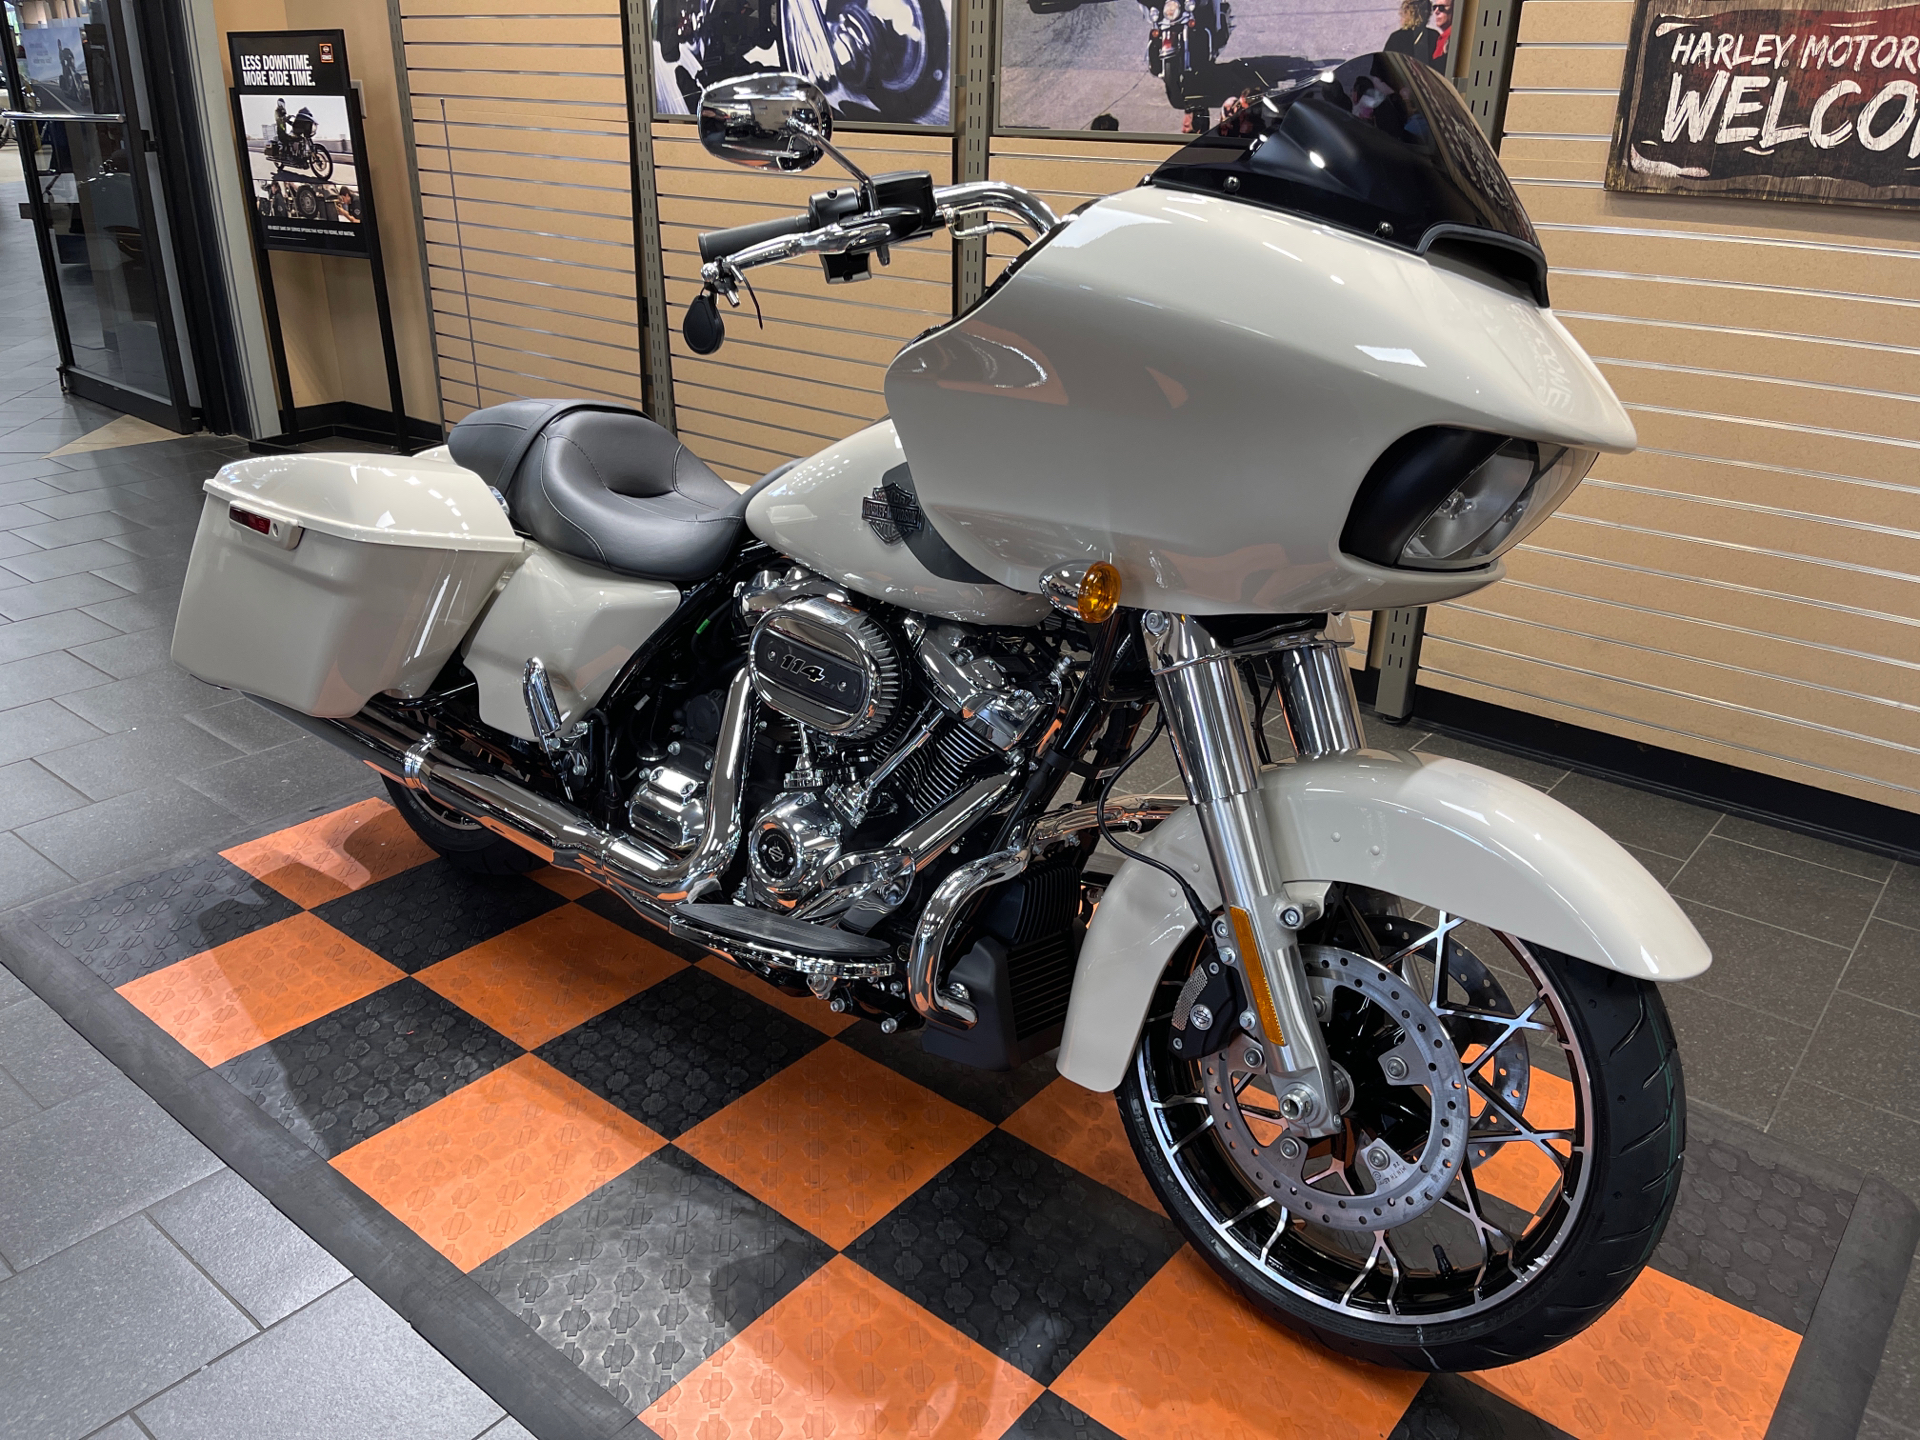 2022 Harley-Davidson Road Glide® Special in The Woodlands, Texas - Photo 2